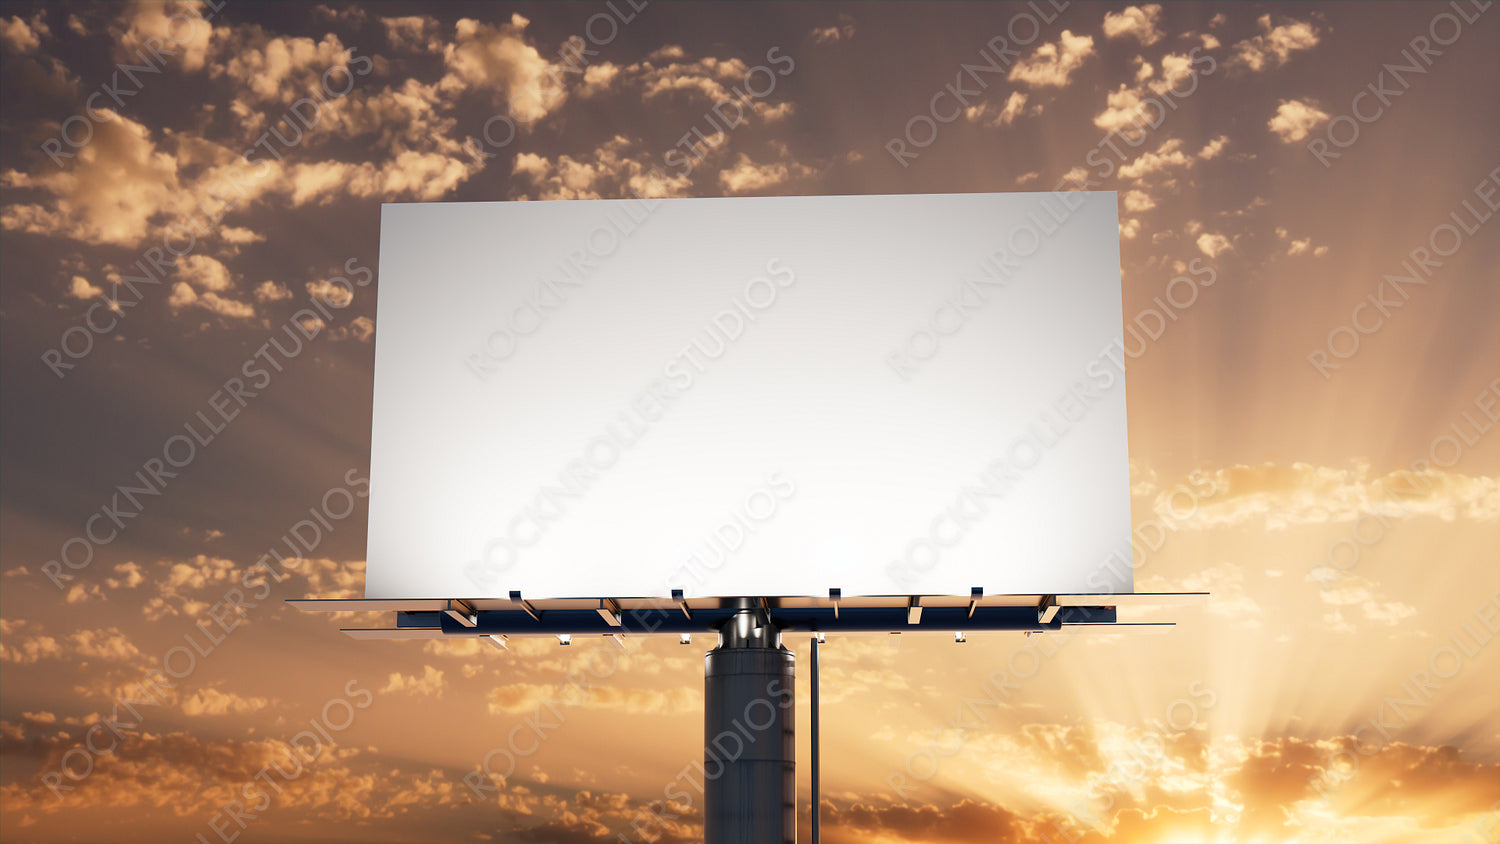 Marketing Billboard. Empty Large Format Sign against a Sunset Evening Sky. Mockup Template.